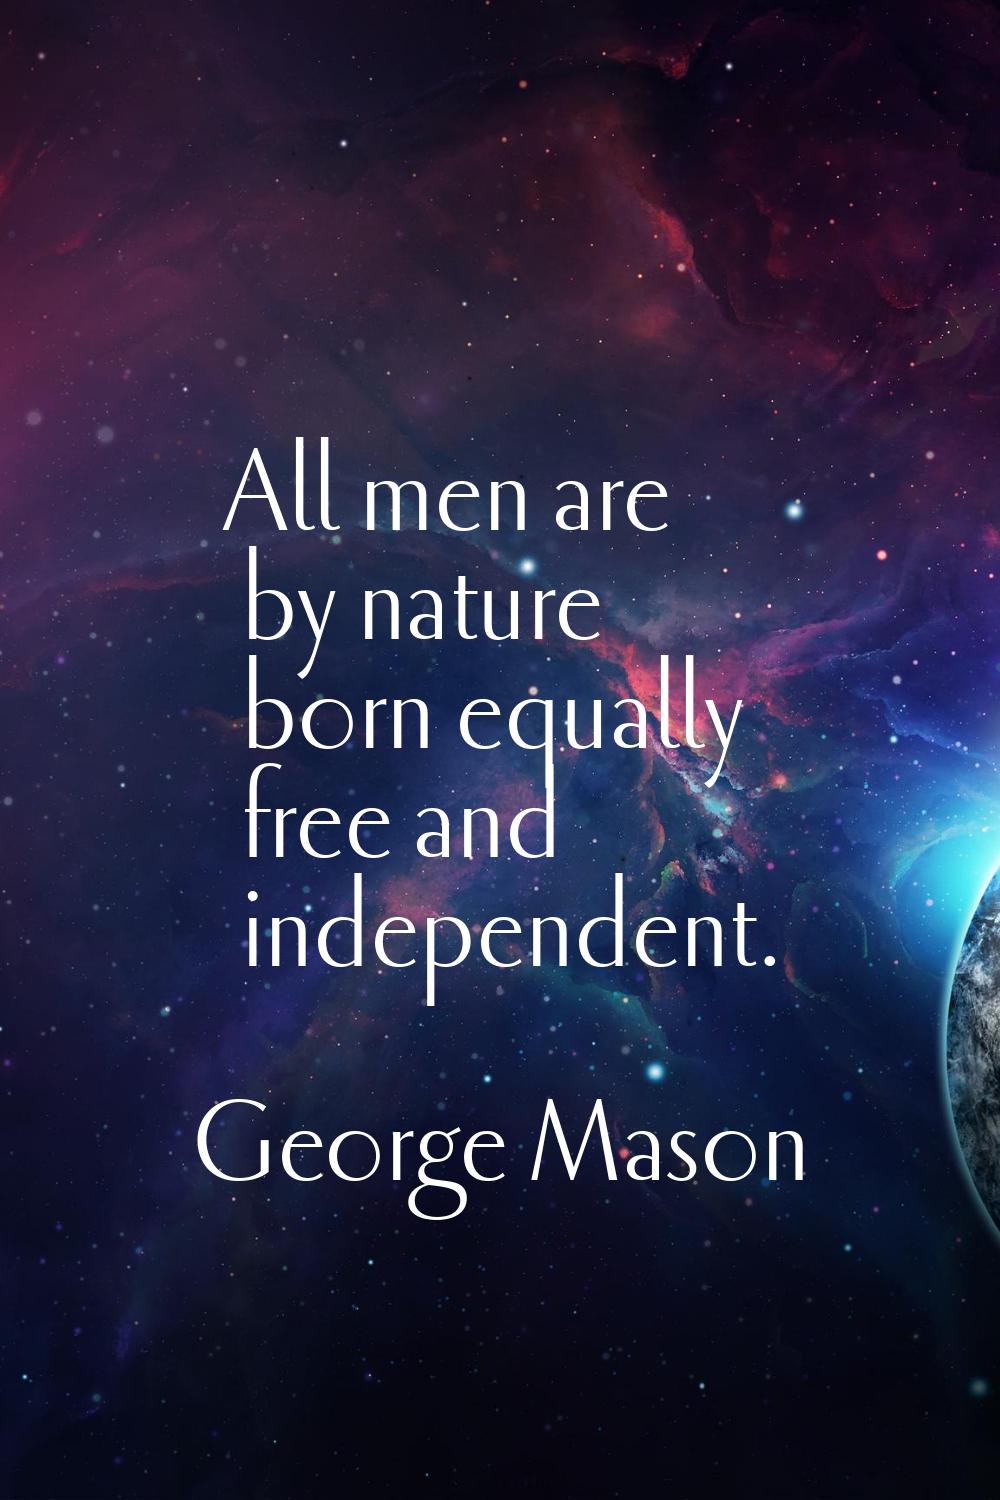 All men are by nature born equally free and independent.